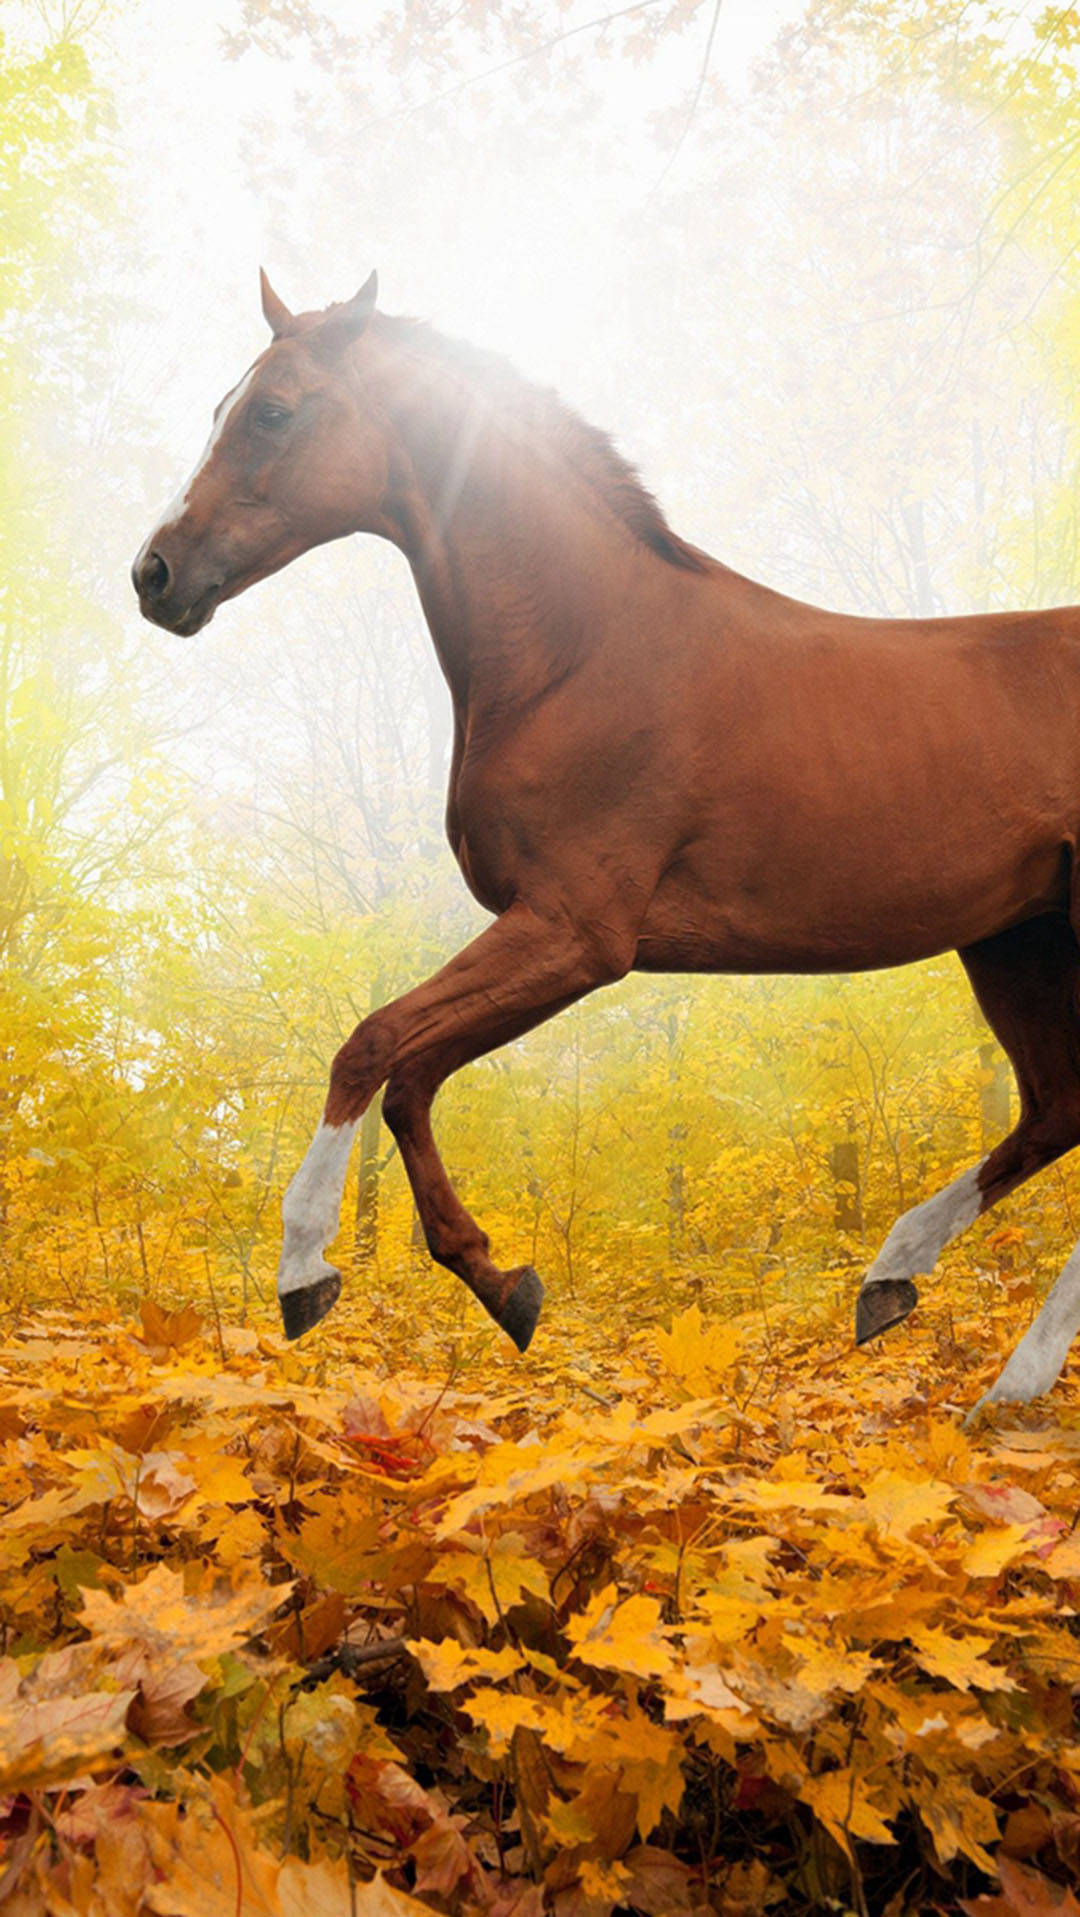 Autumn Iphone Foliage With Brown Horse Wallpaper